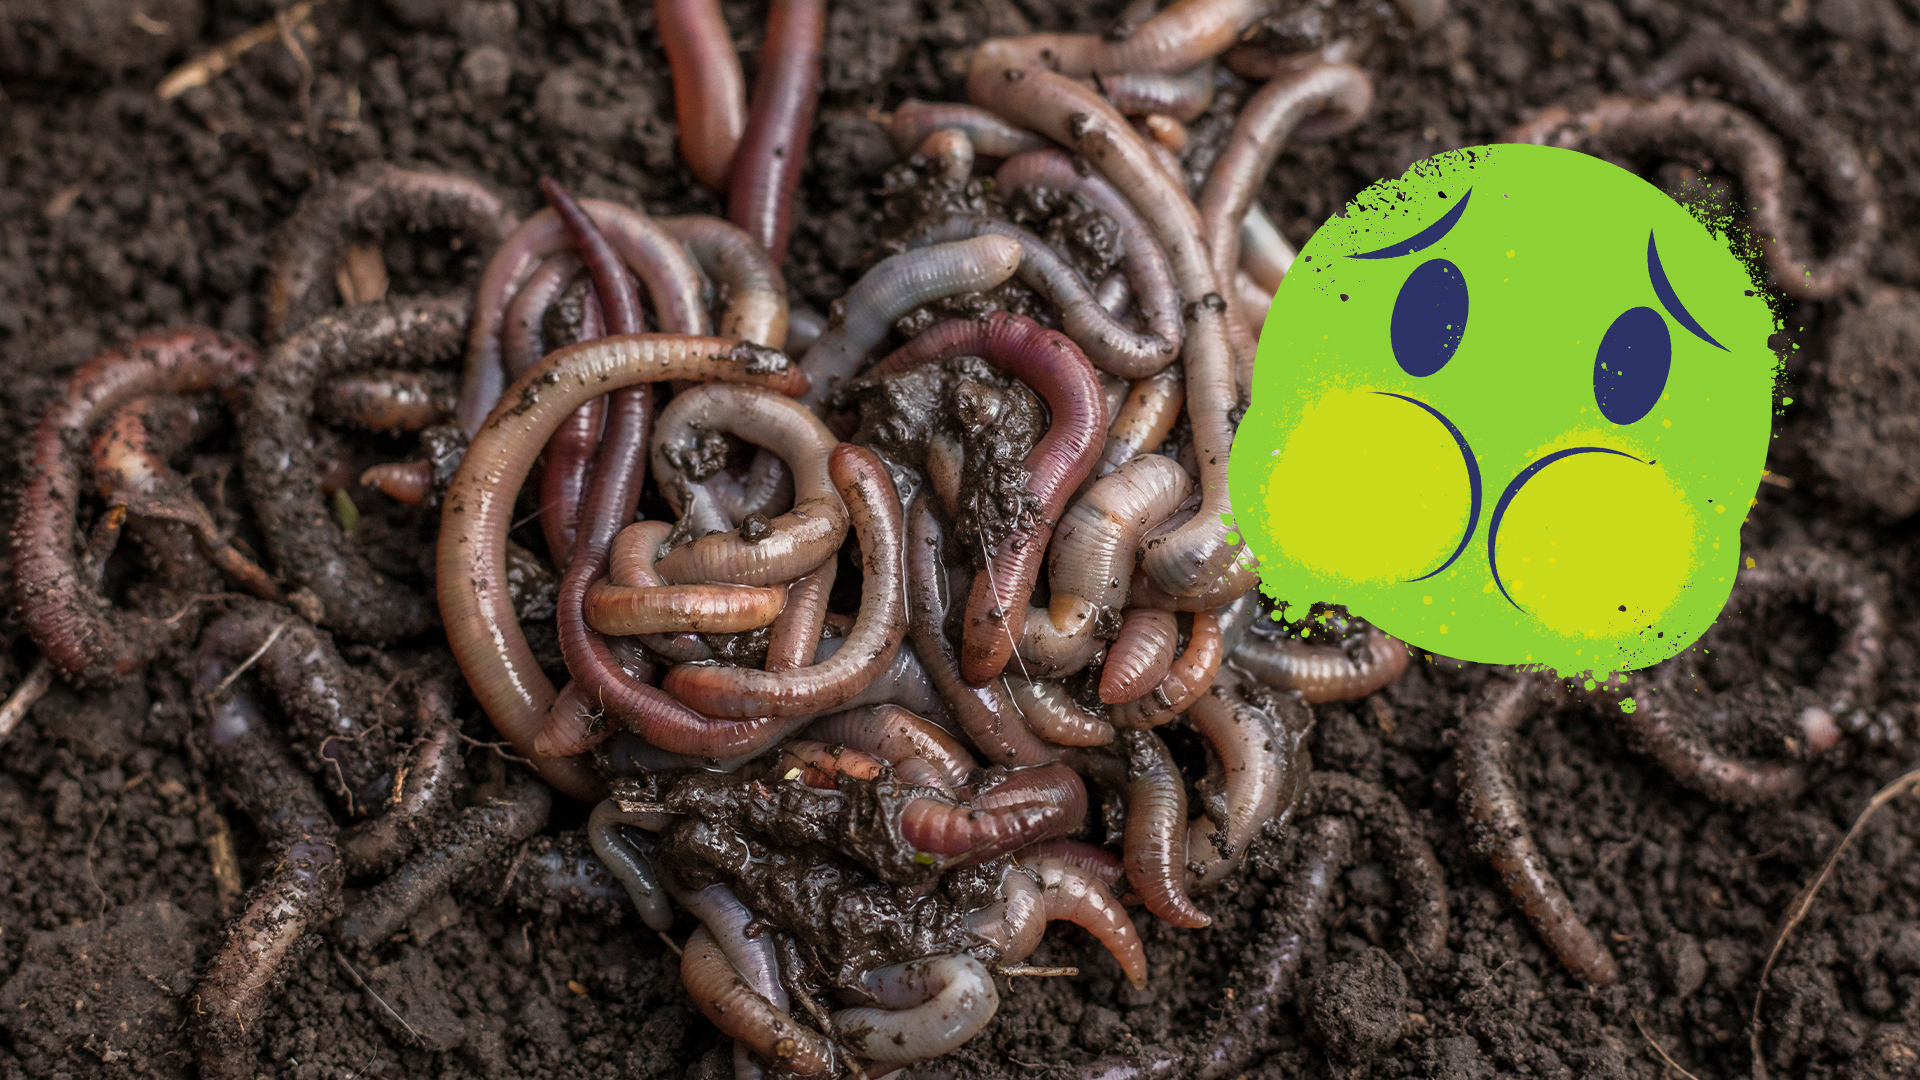 Worms in mud and sick face emoji